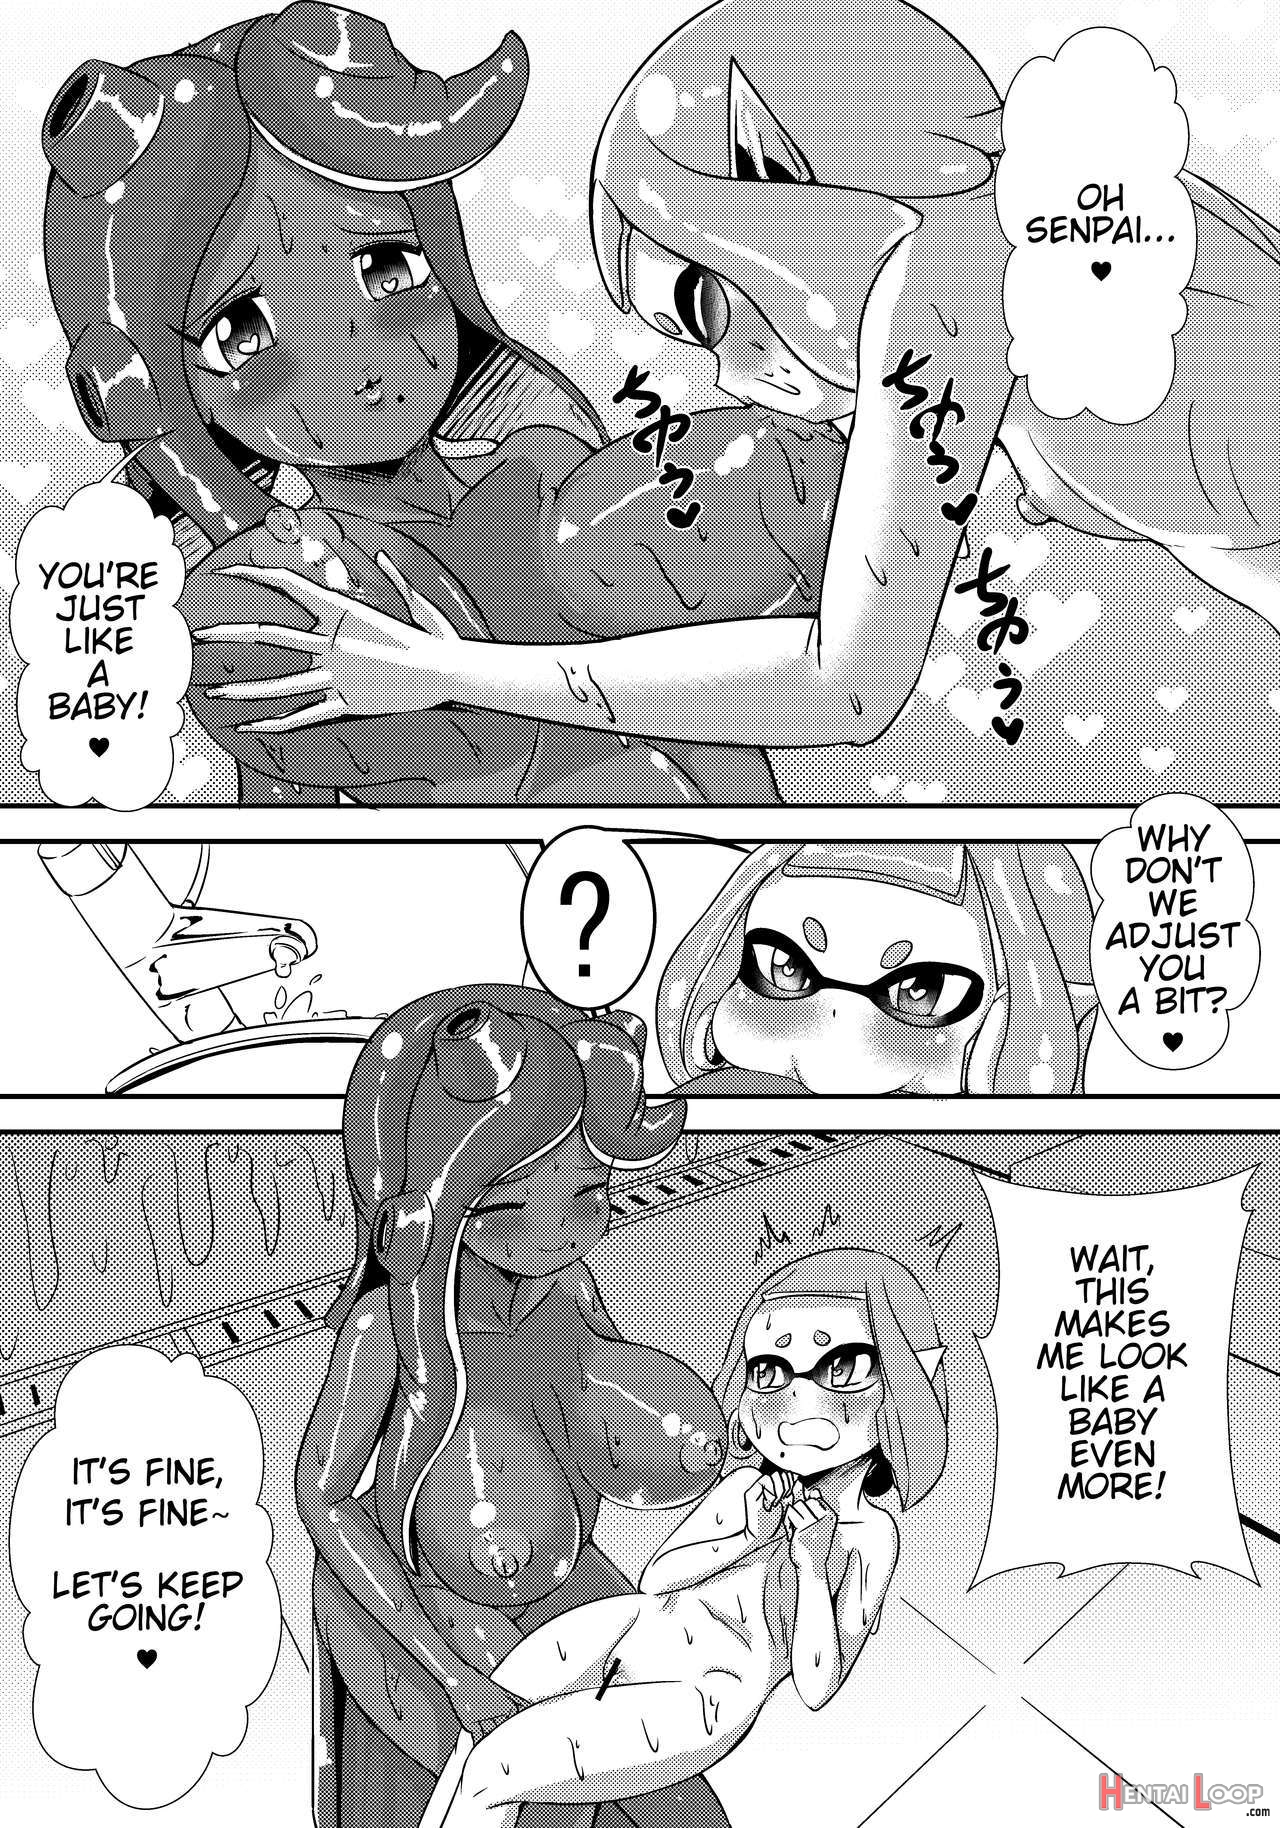 Splat Double page 7